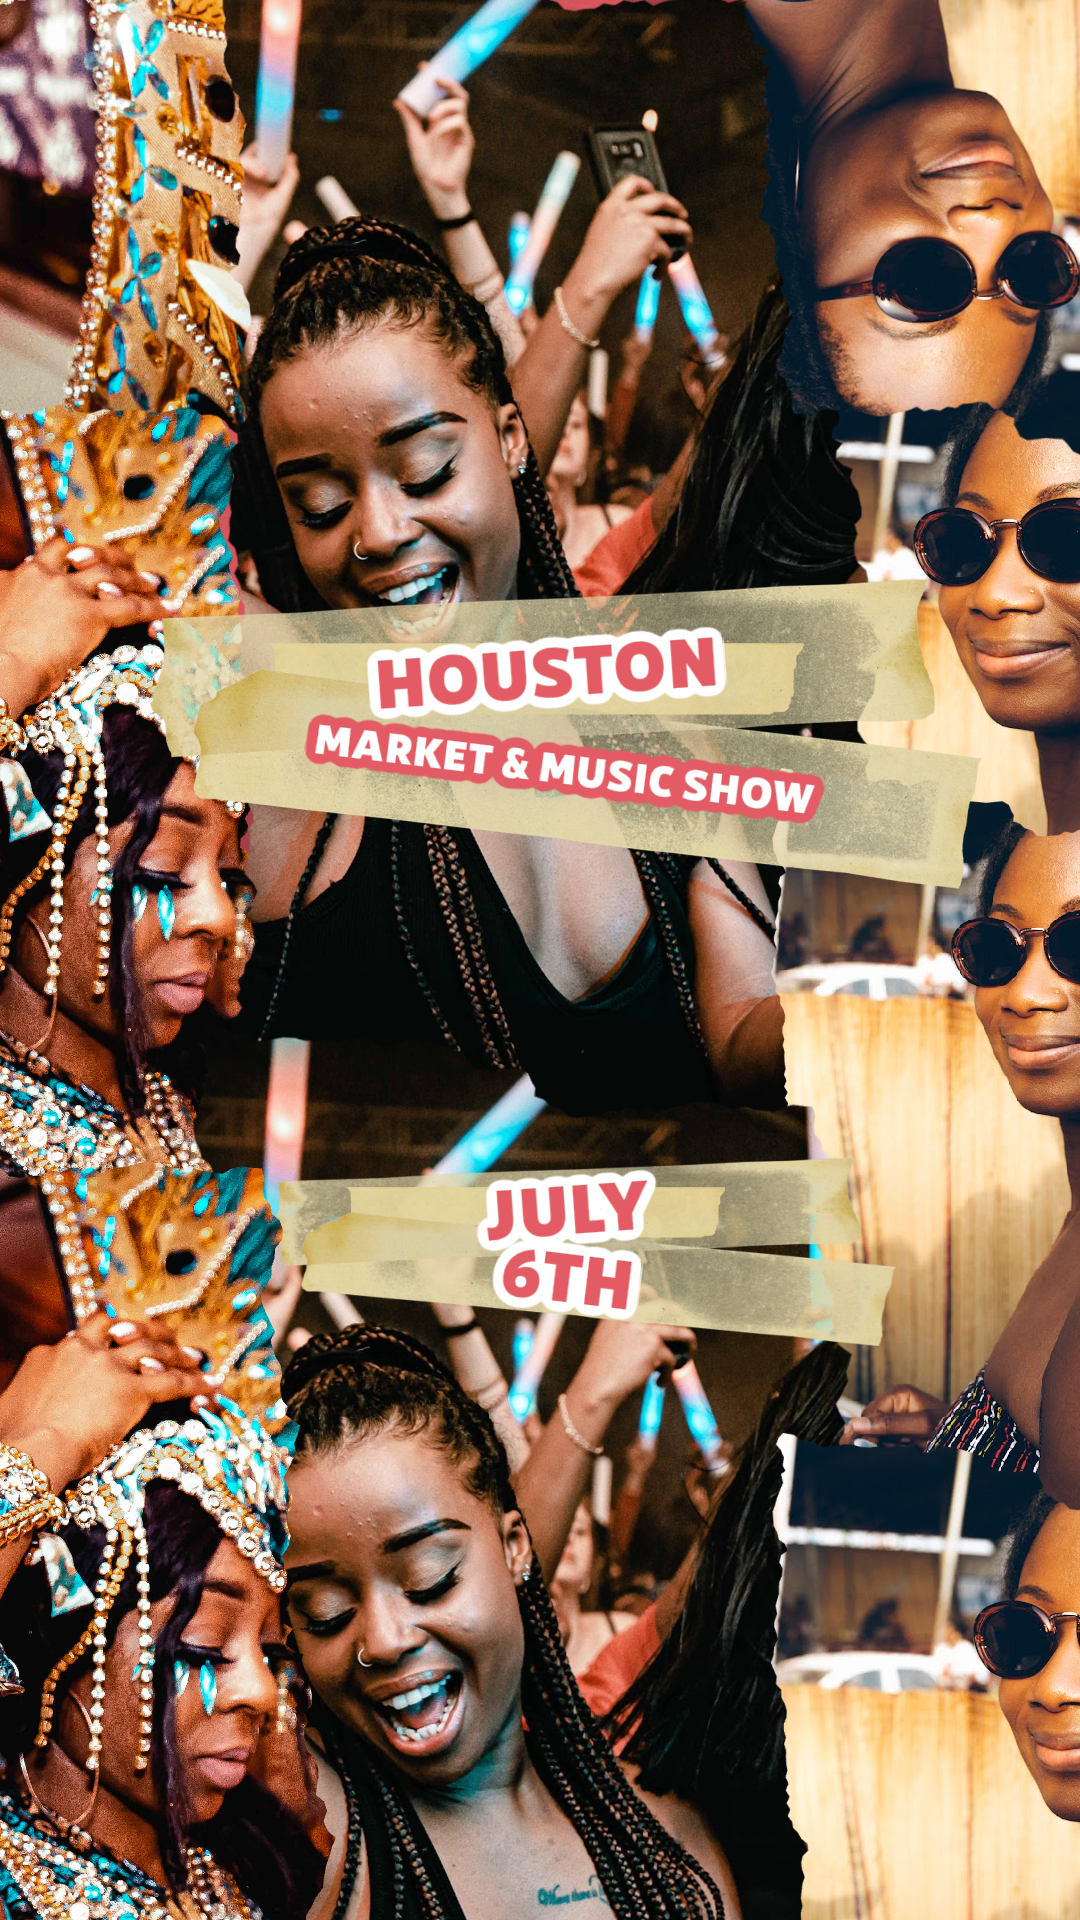 AfroSocaLove : Houston Party & BlackOwned Market (Feat Maga Stories & More)